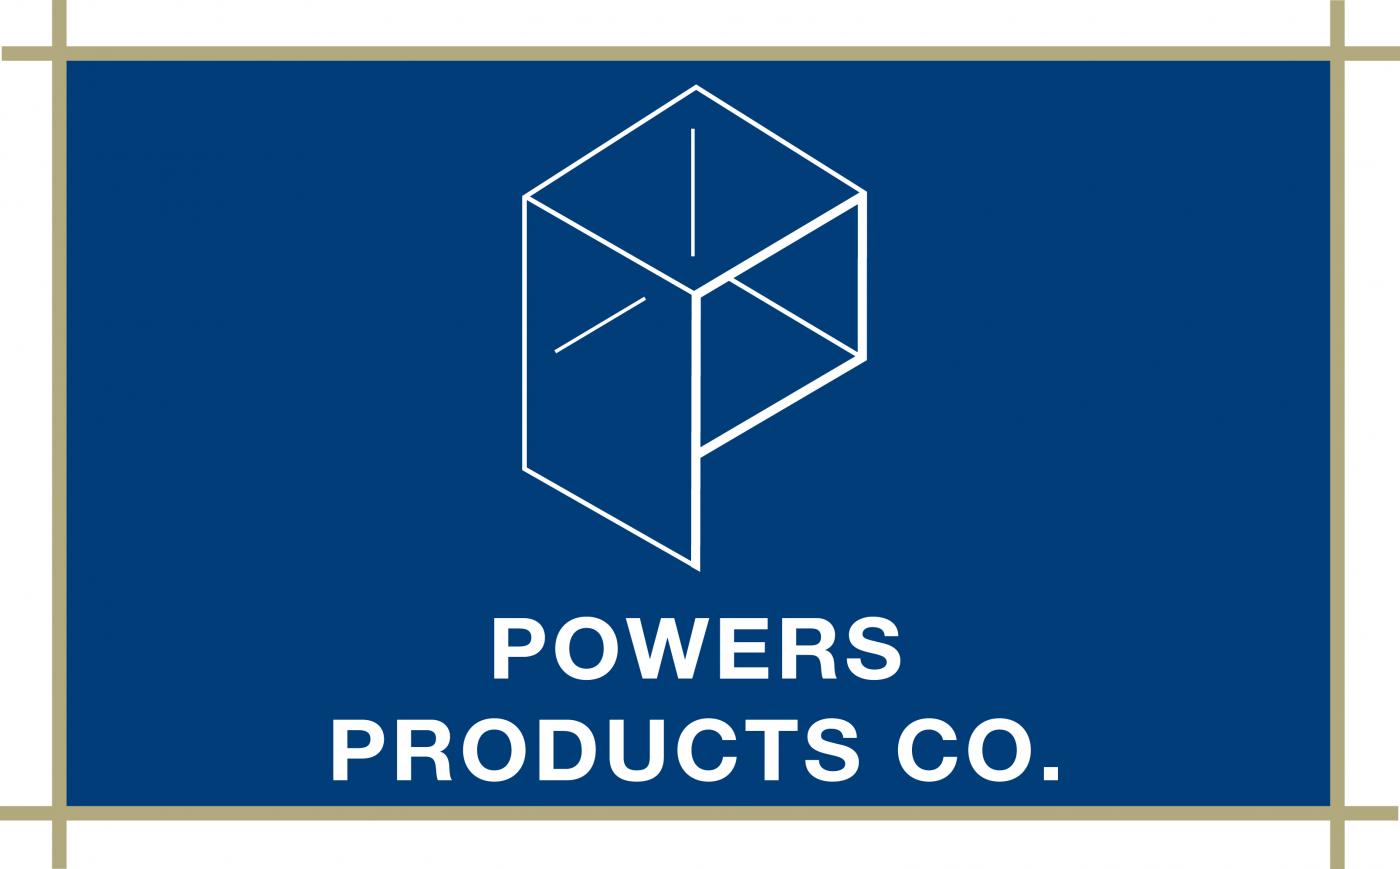 Powers Products